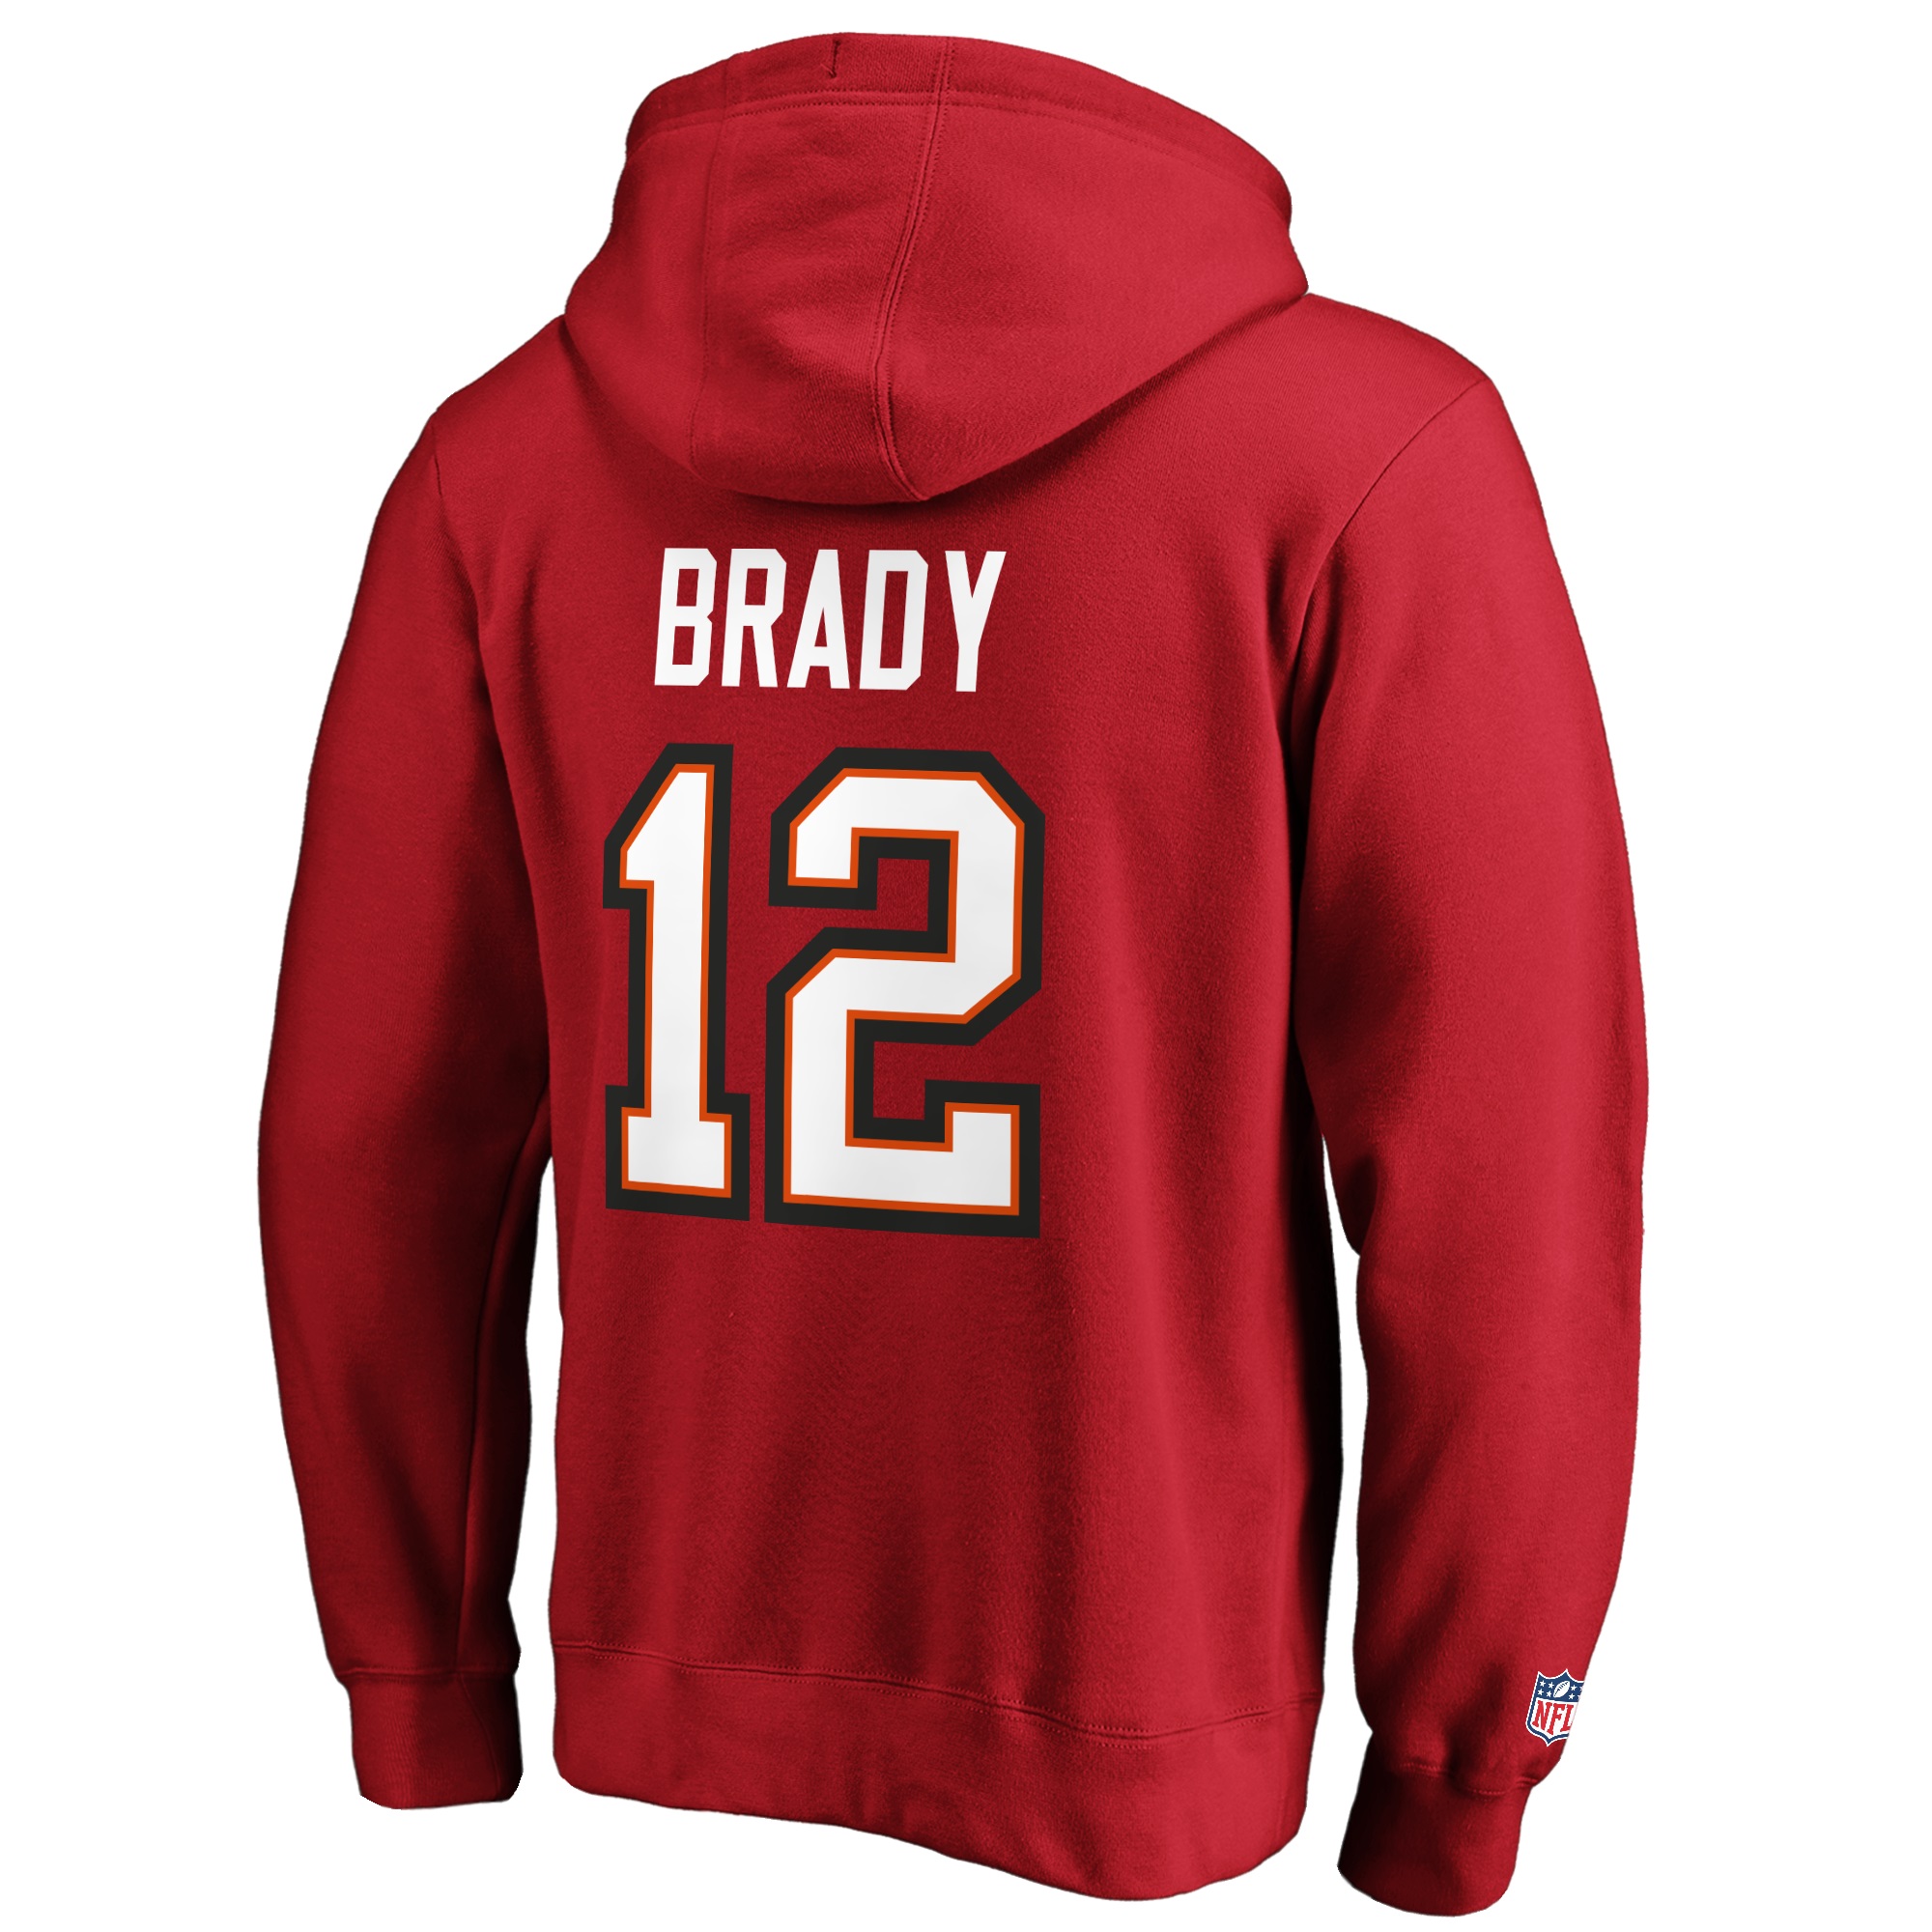 Tom Brady #12 Tampa Bay Buccaneers Iconic Name and Number Graphic Hoody Fanatics